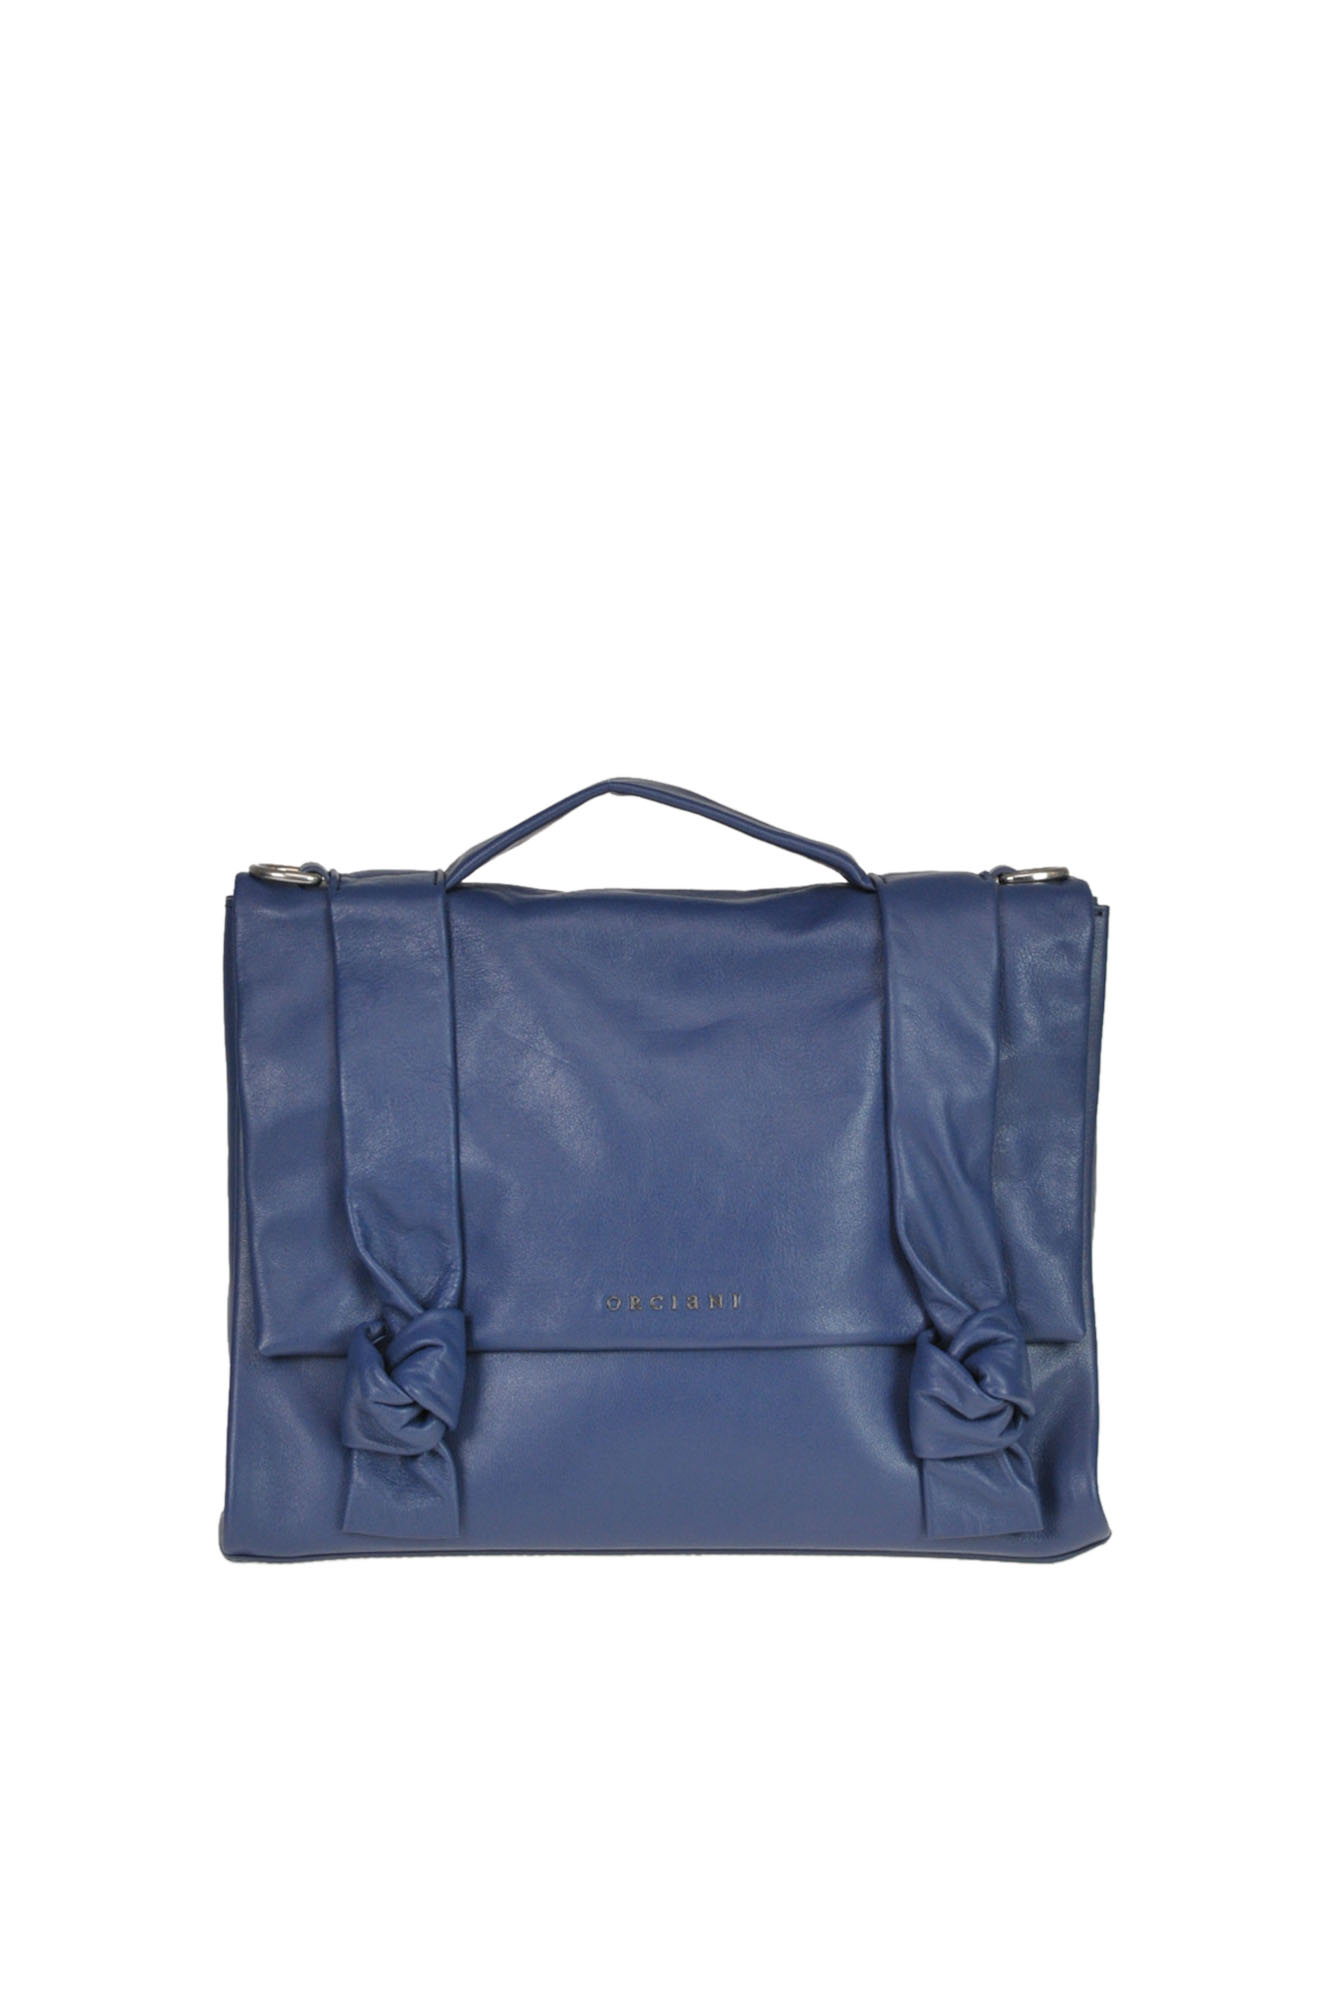 Orciani Bella Leather Bag In Navy Blue